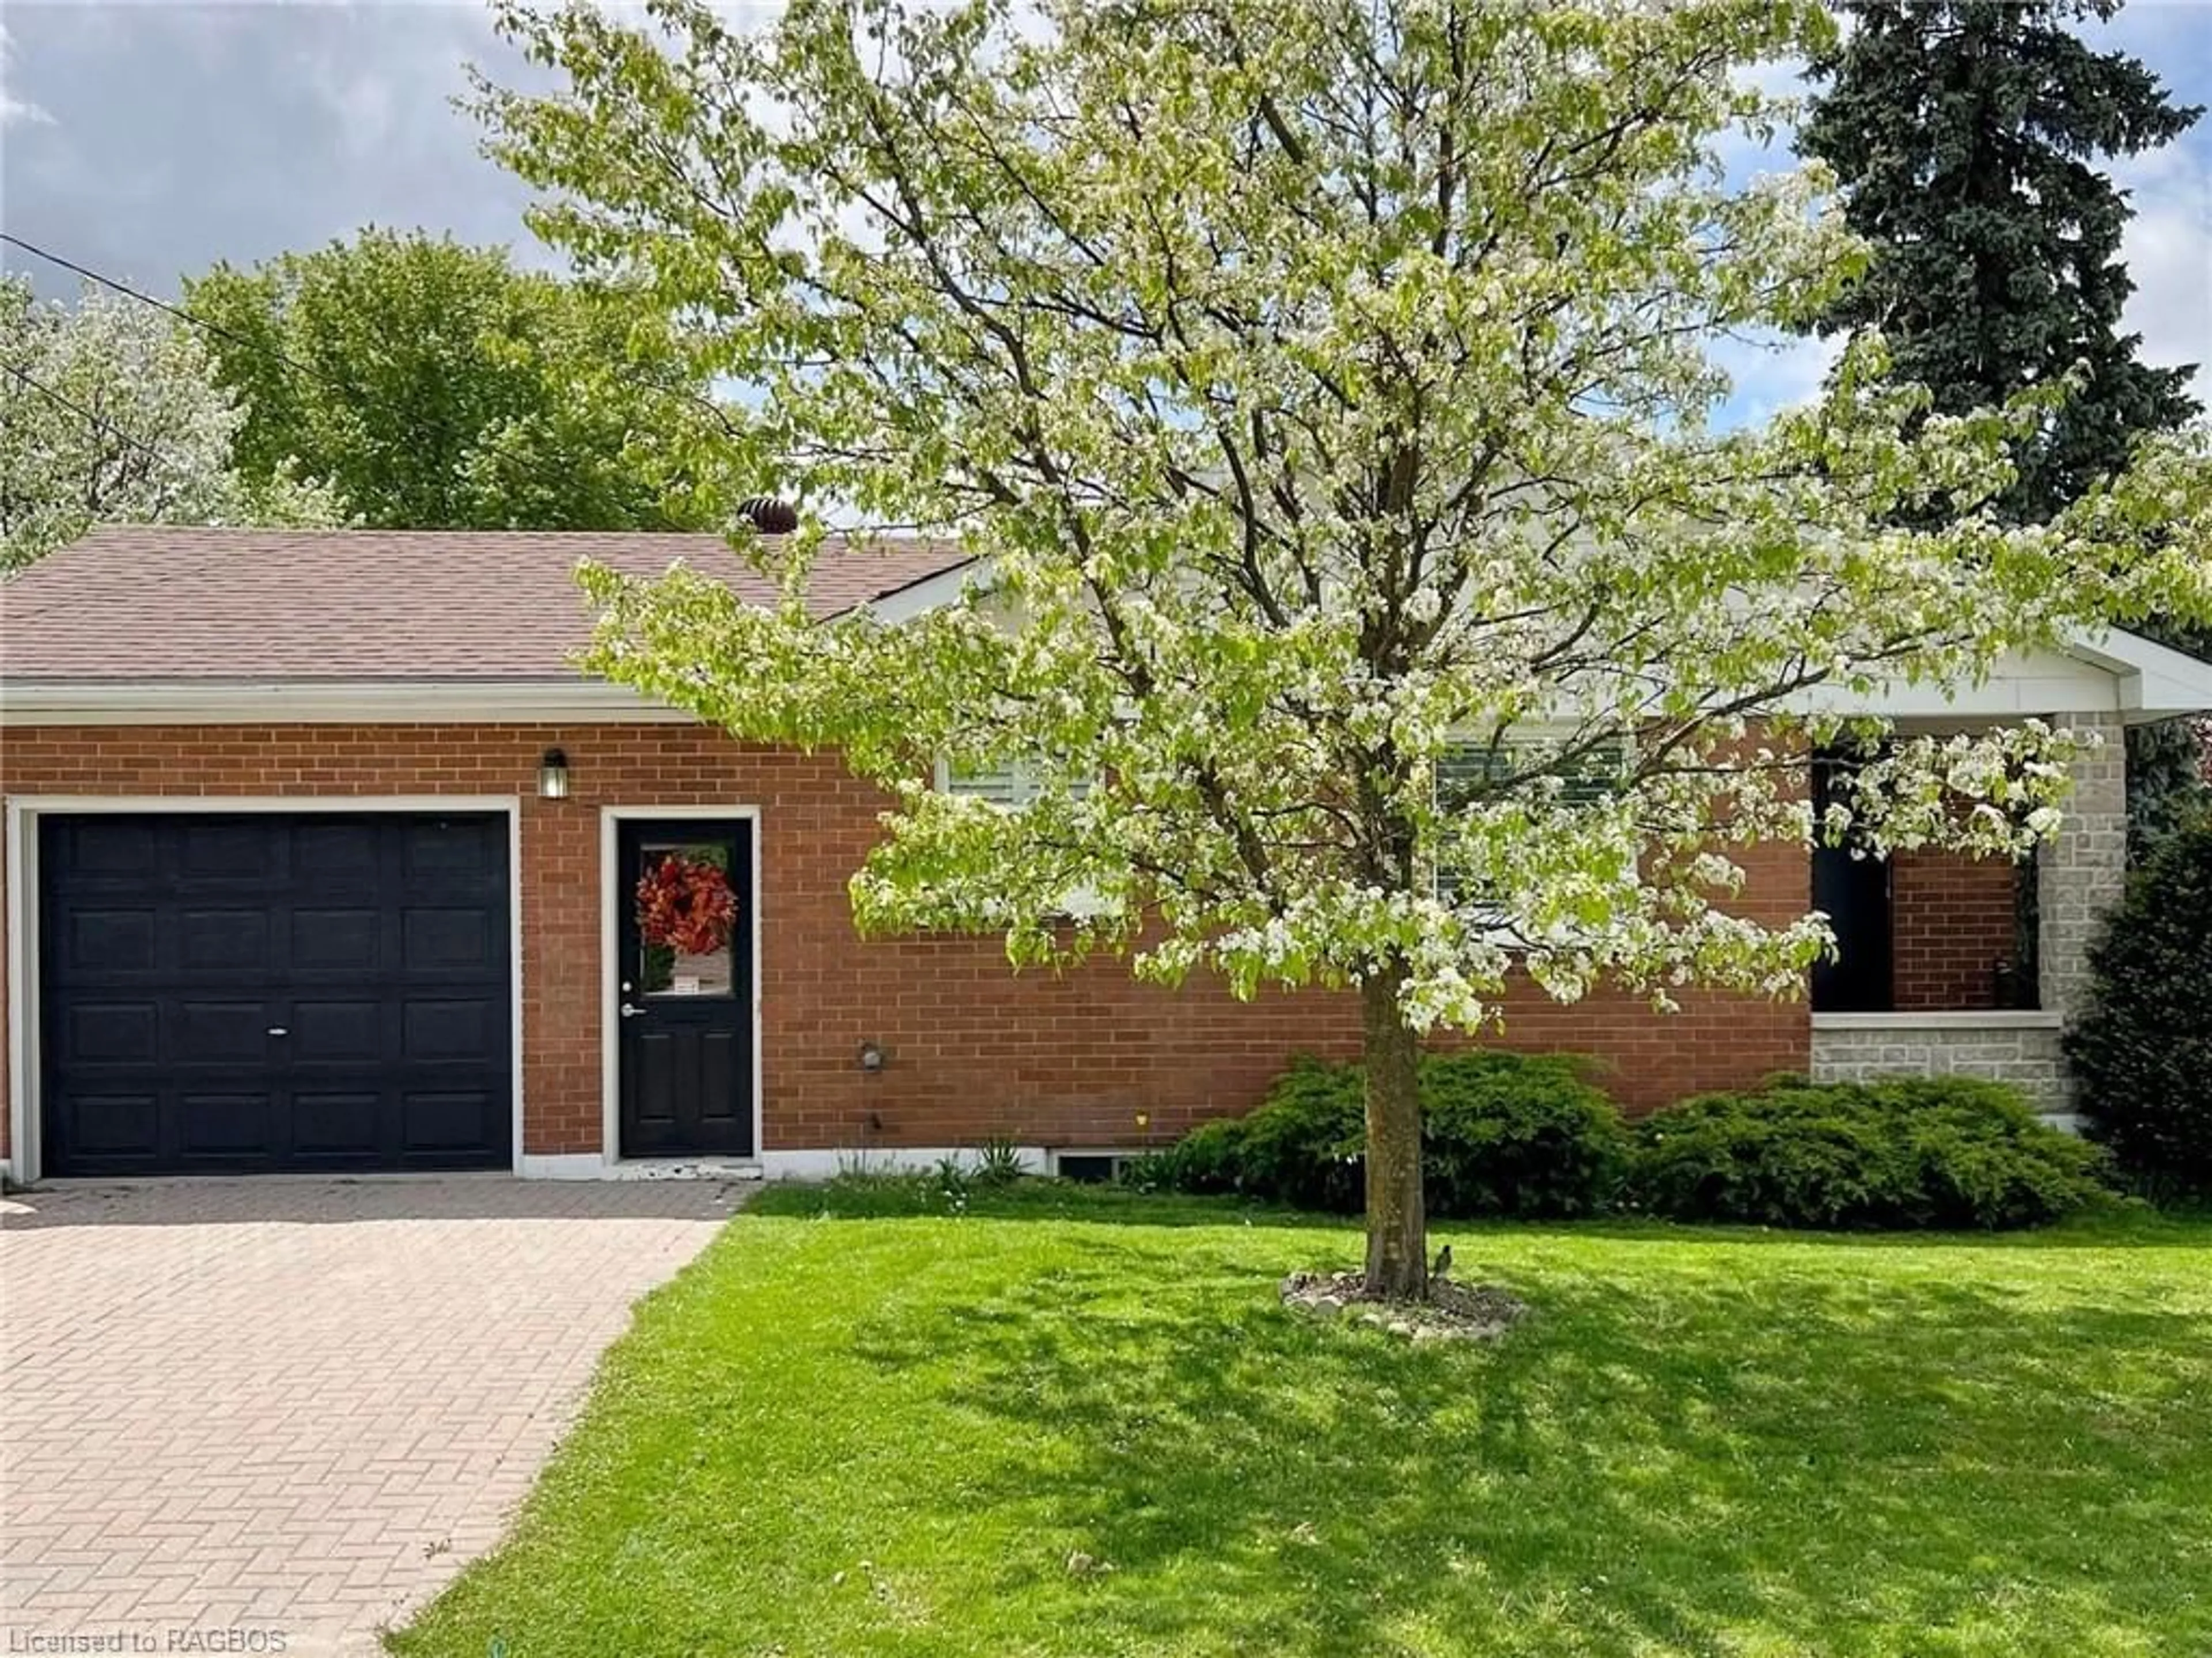 Home with brick exterior material for 549 13th St, Hanover Ontario N4N 1Y5